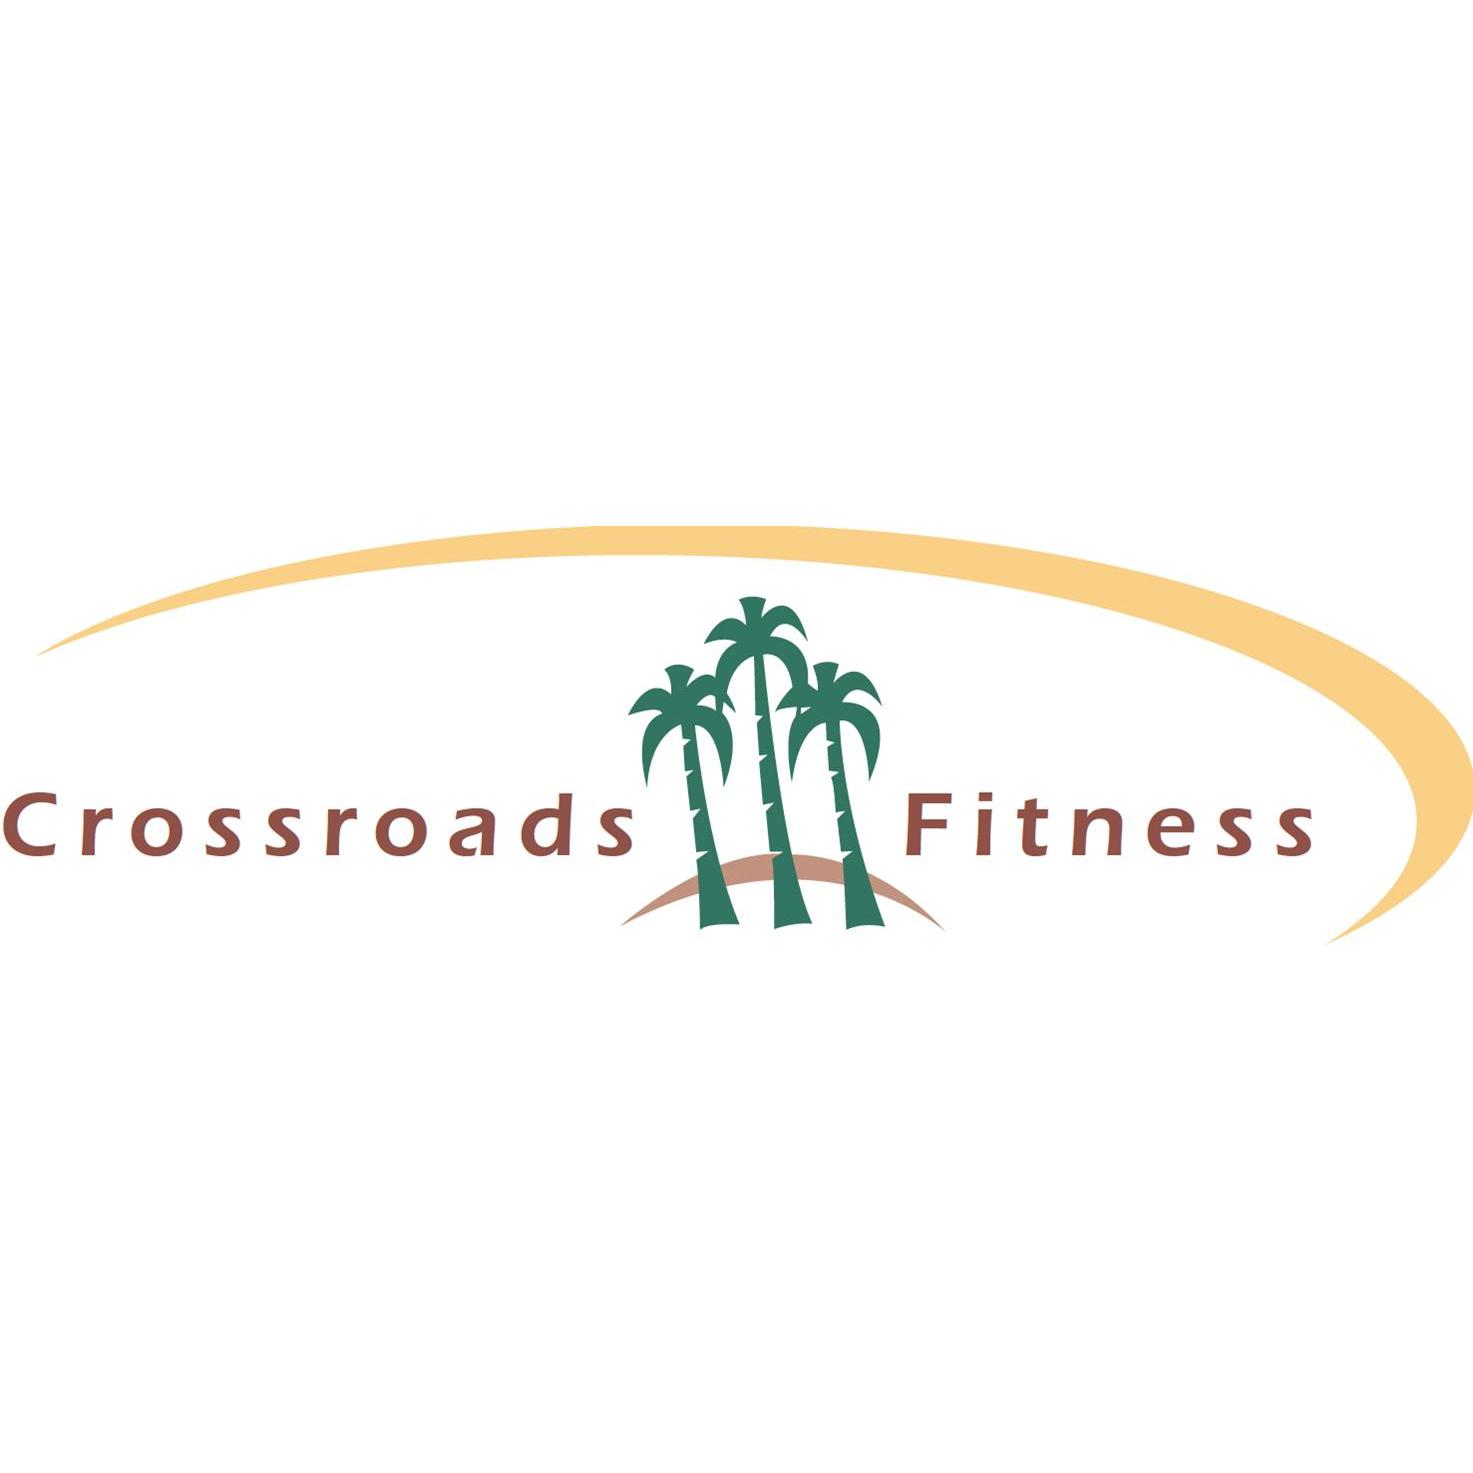 Crossroads Fitness Downtown - Grand Junction, CO 81501 - (970)241-7800 | ShowMeLocal.com